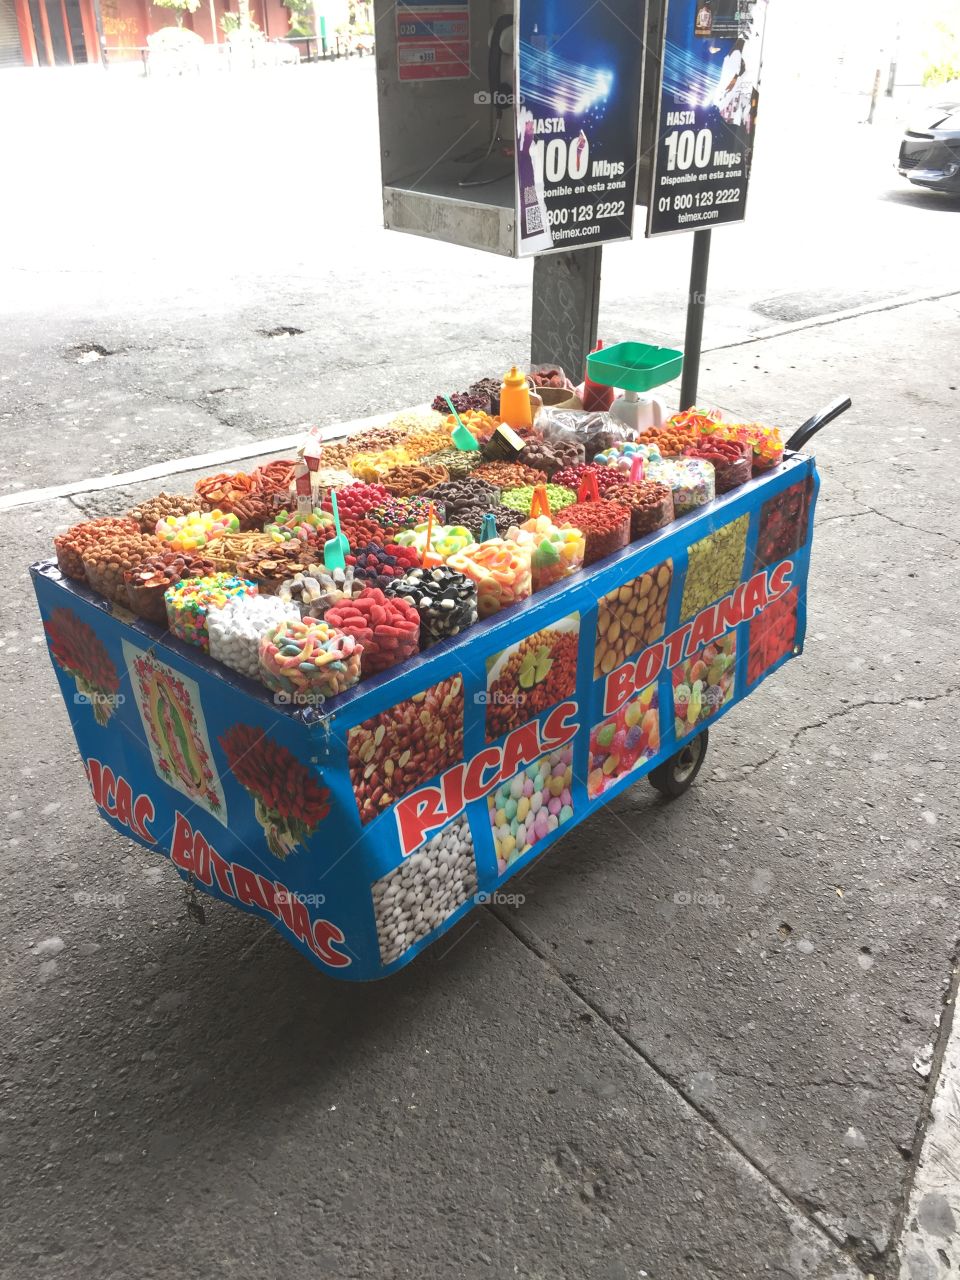 Candy in a cart, Mexico City, Mexico